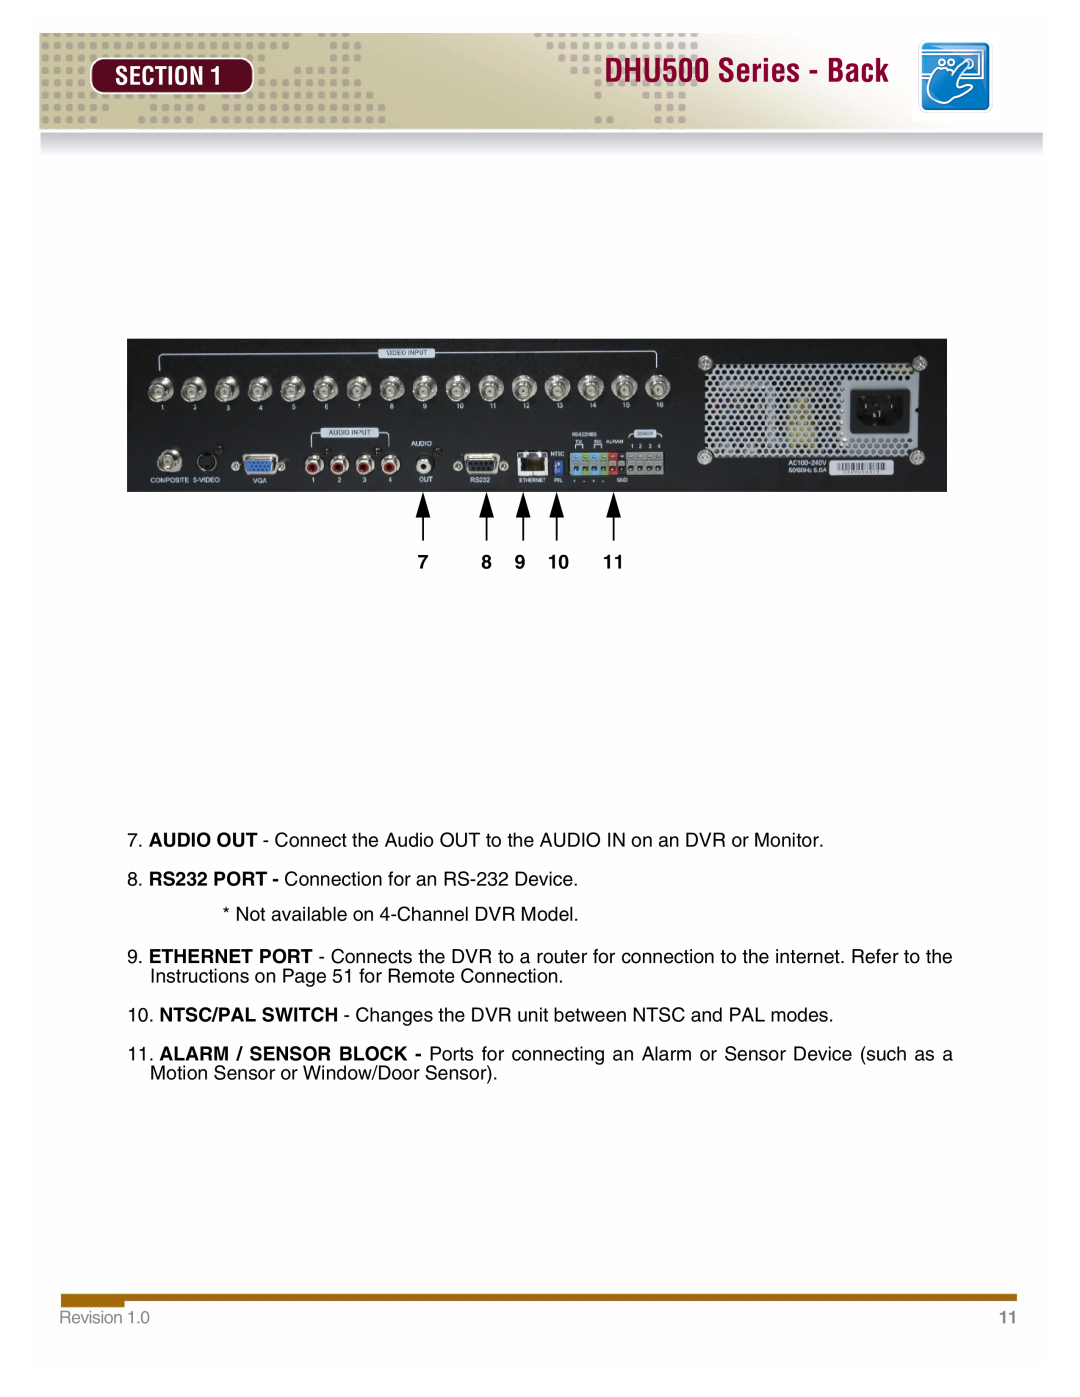 LOREX Technology manual DHU500 Series - Back, Section, 7 8 9 10, 8. RS232 PORT - Connection for an RS-232 Device 